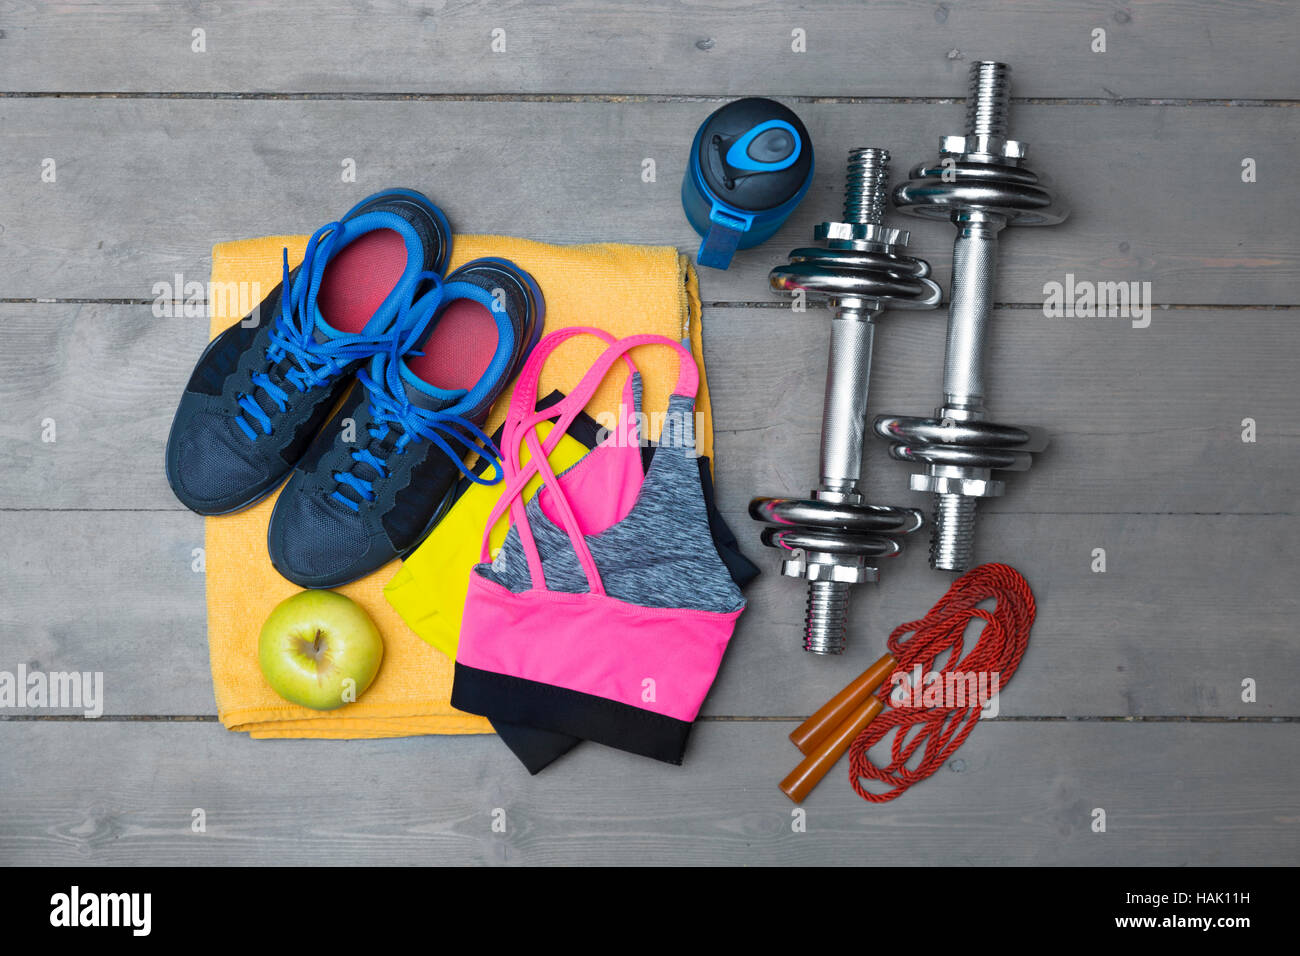 top view of colorful fitness equipment on wooden floor Stock Photo